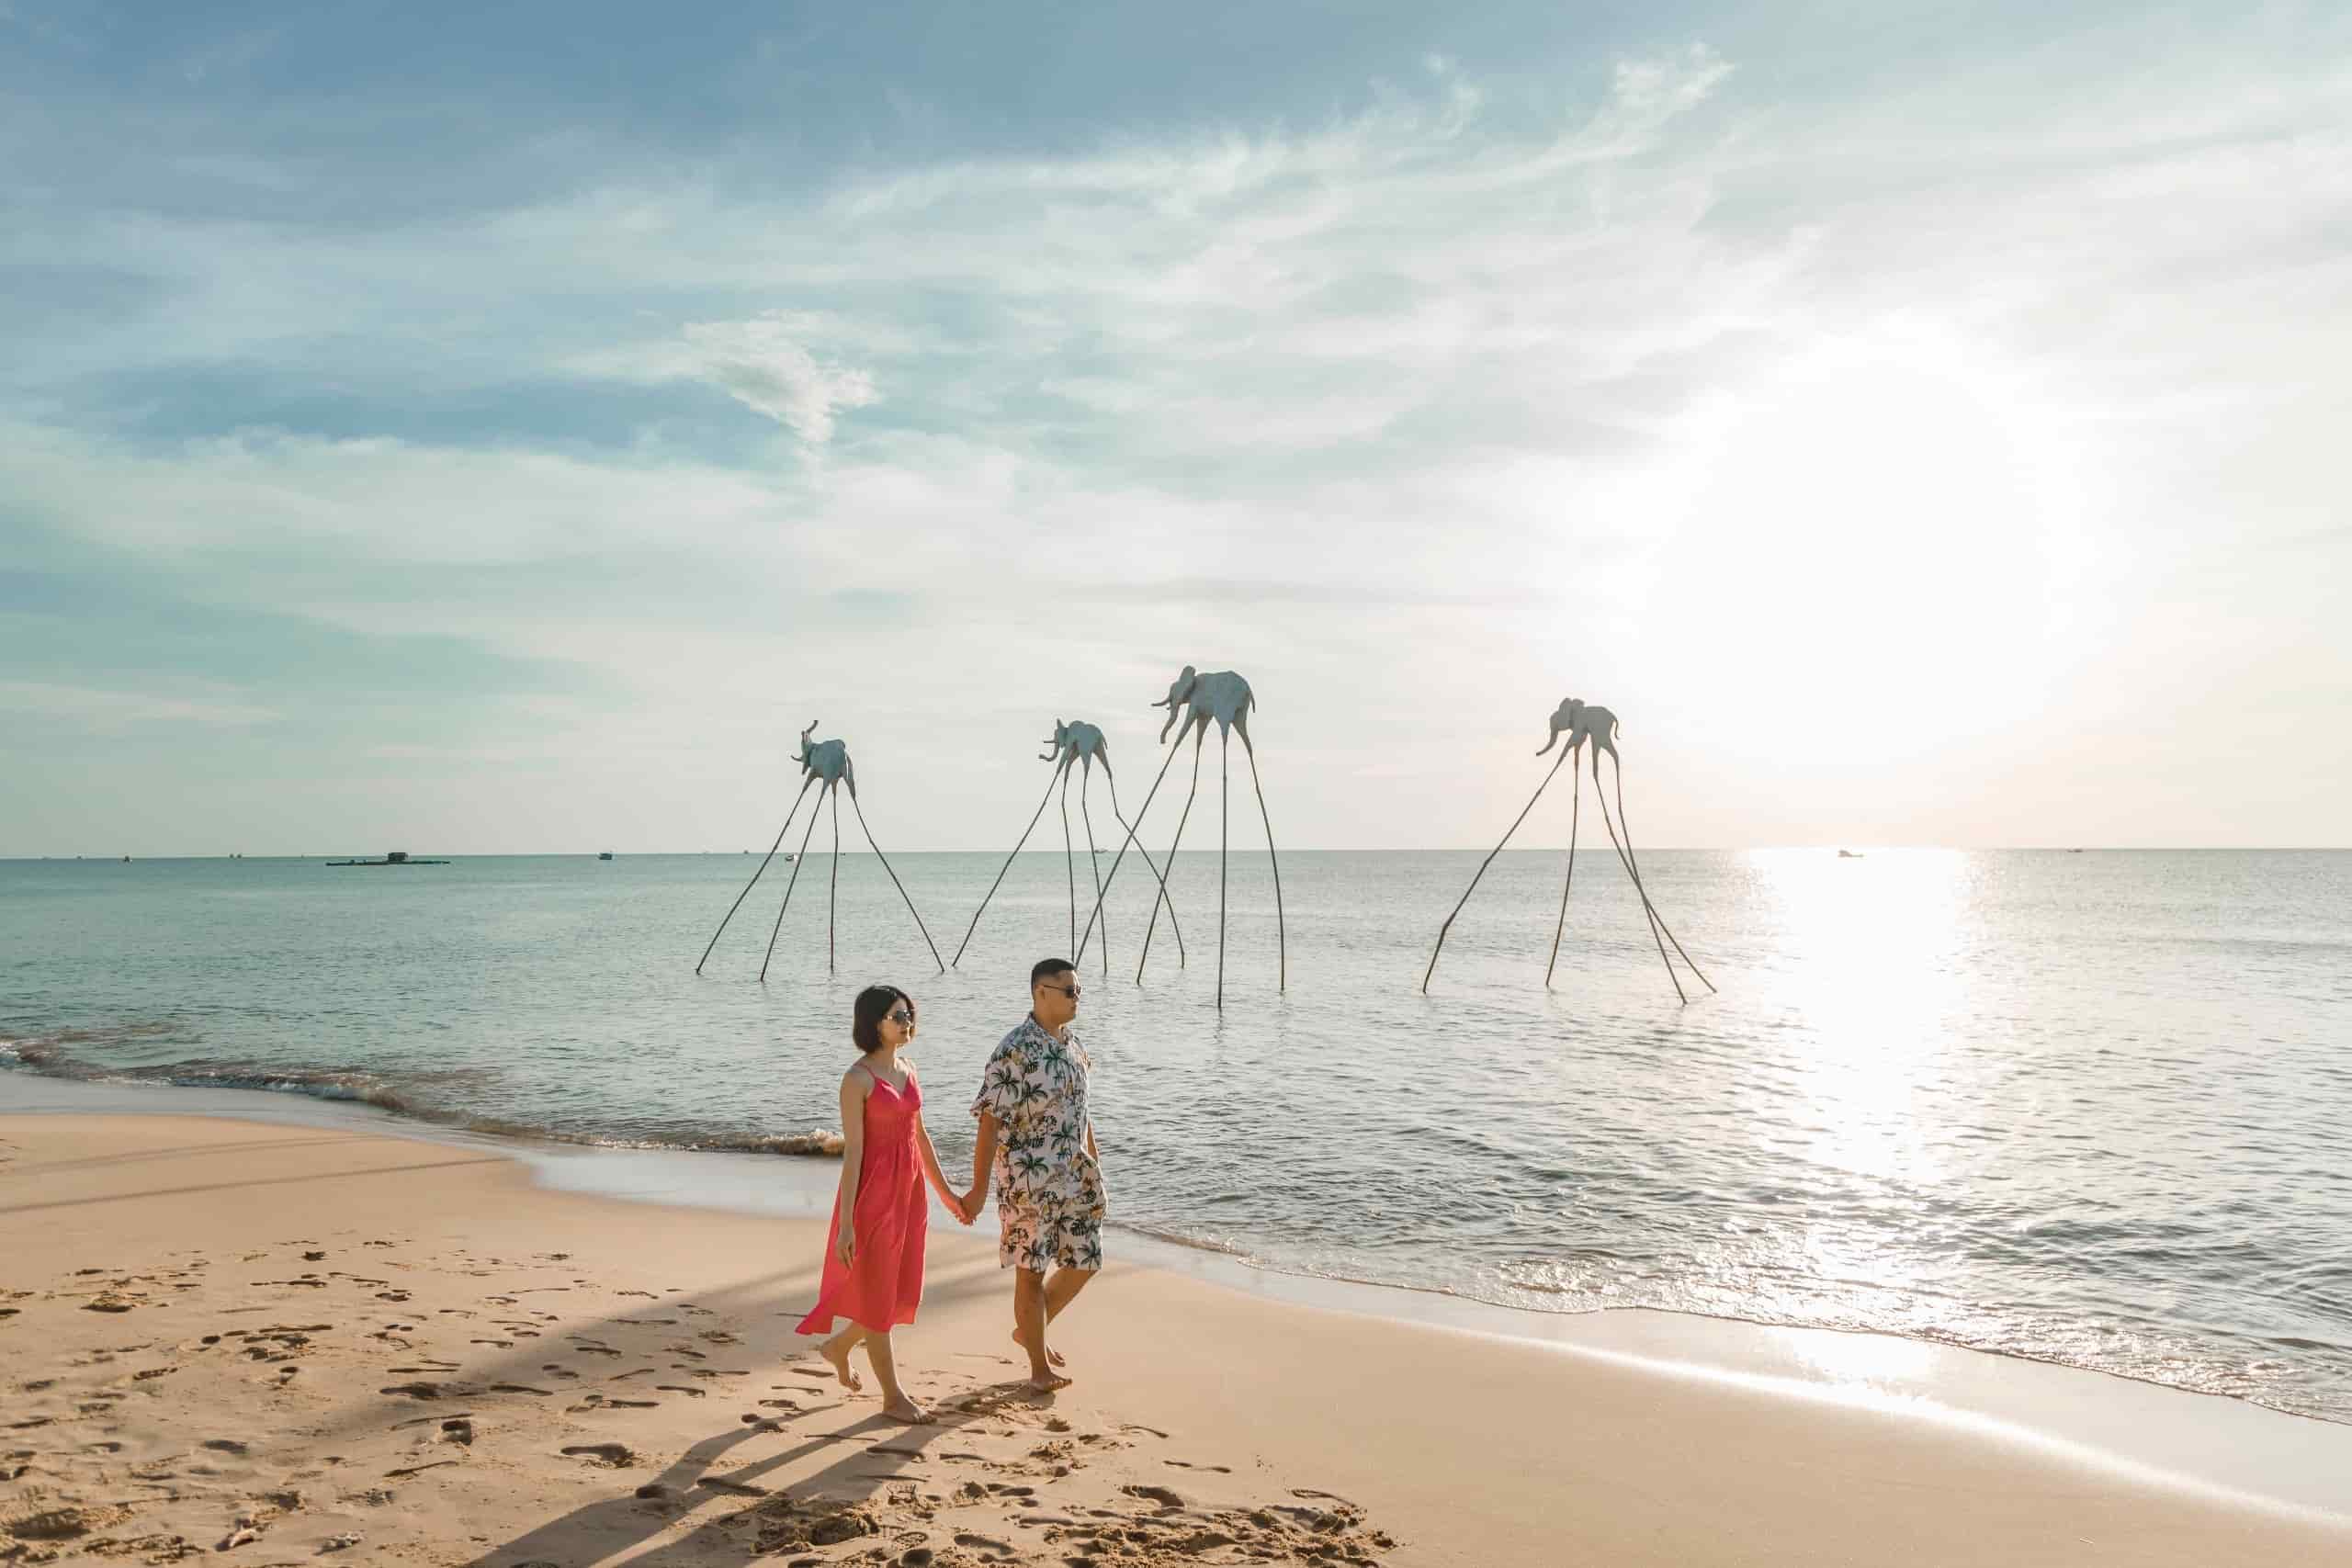 Visitor checked in at Sunset Sanato located at Bai Truong, Phu Quoc